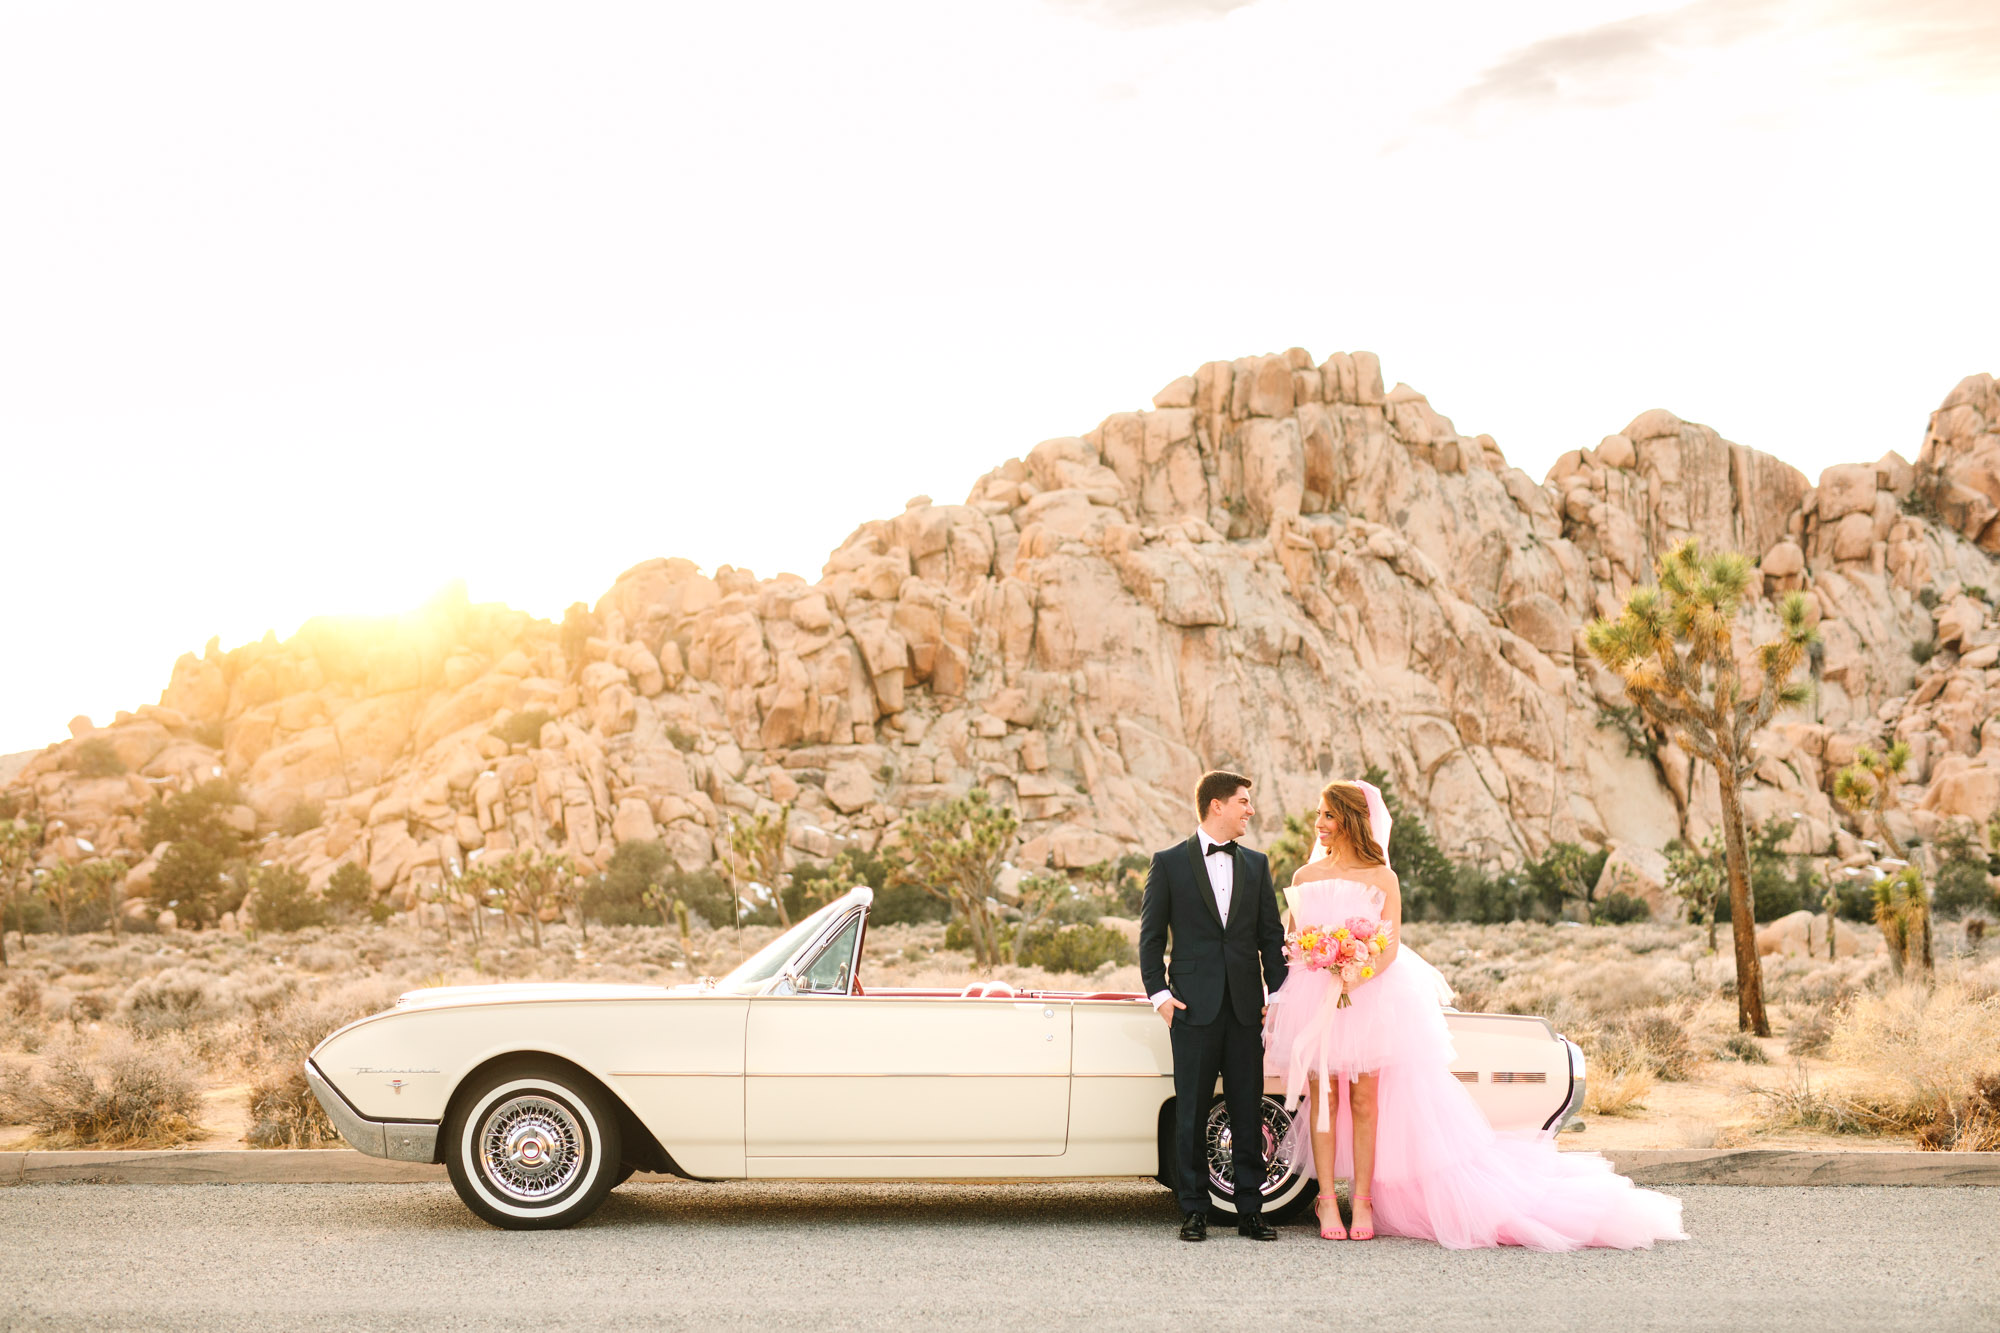 Bride and groom with white classic Ford Thunderbird | Pink wedding dress Joshua Tree elopement featured on Green Wedding Shoes | Colorful desert wedding inspiration for fun-loving couples in Southern California #joshuatreewedding #joshuatreeelopement #pinkwedding #greenweddingshoes Source: Mary Costa Photography | Los Angeles